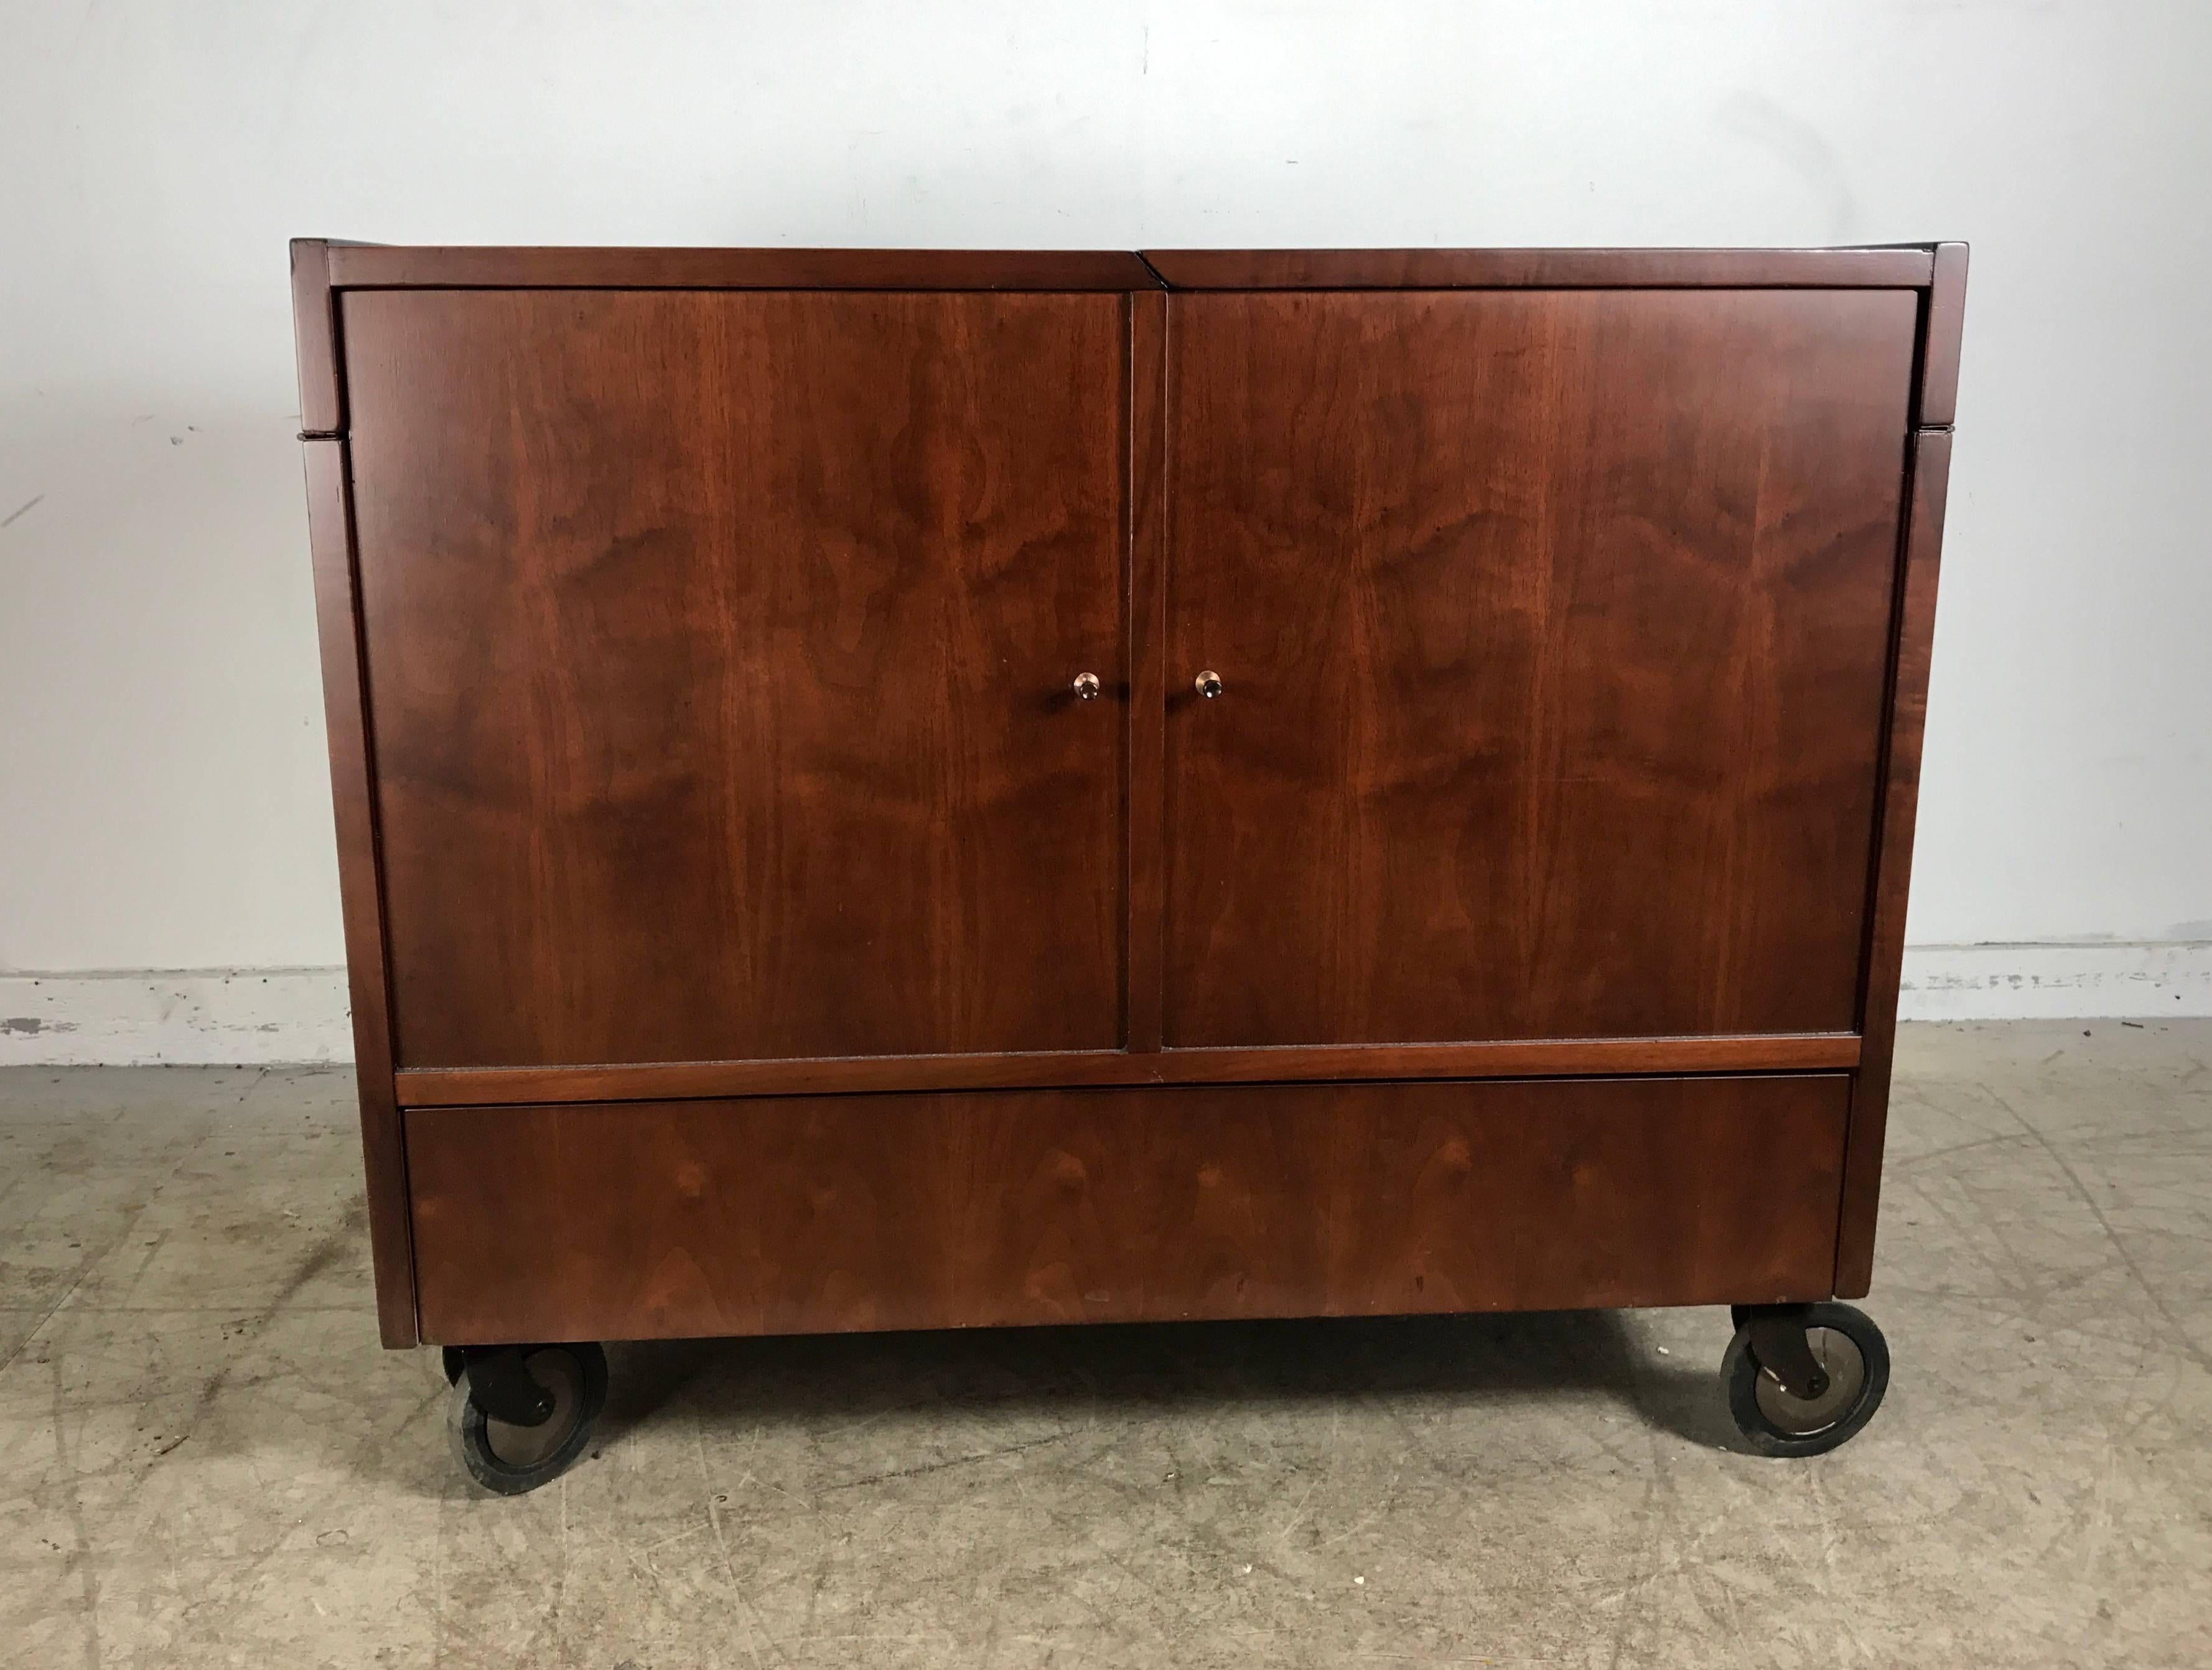 Classic Mid-Century Modern portable rolling fold out bar cart. Beautifully
grained walnut wood, top two panels open for glasses and serving, as well as bottom drawer, also centre surface opens for generous liquor bottle storage, retains original